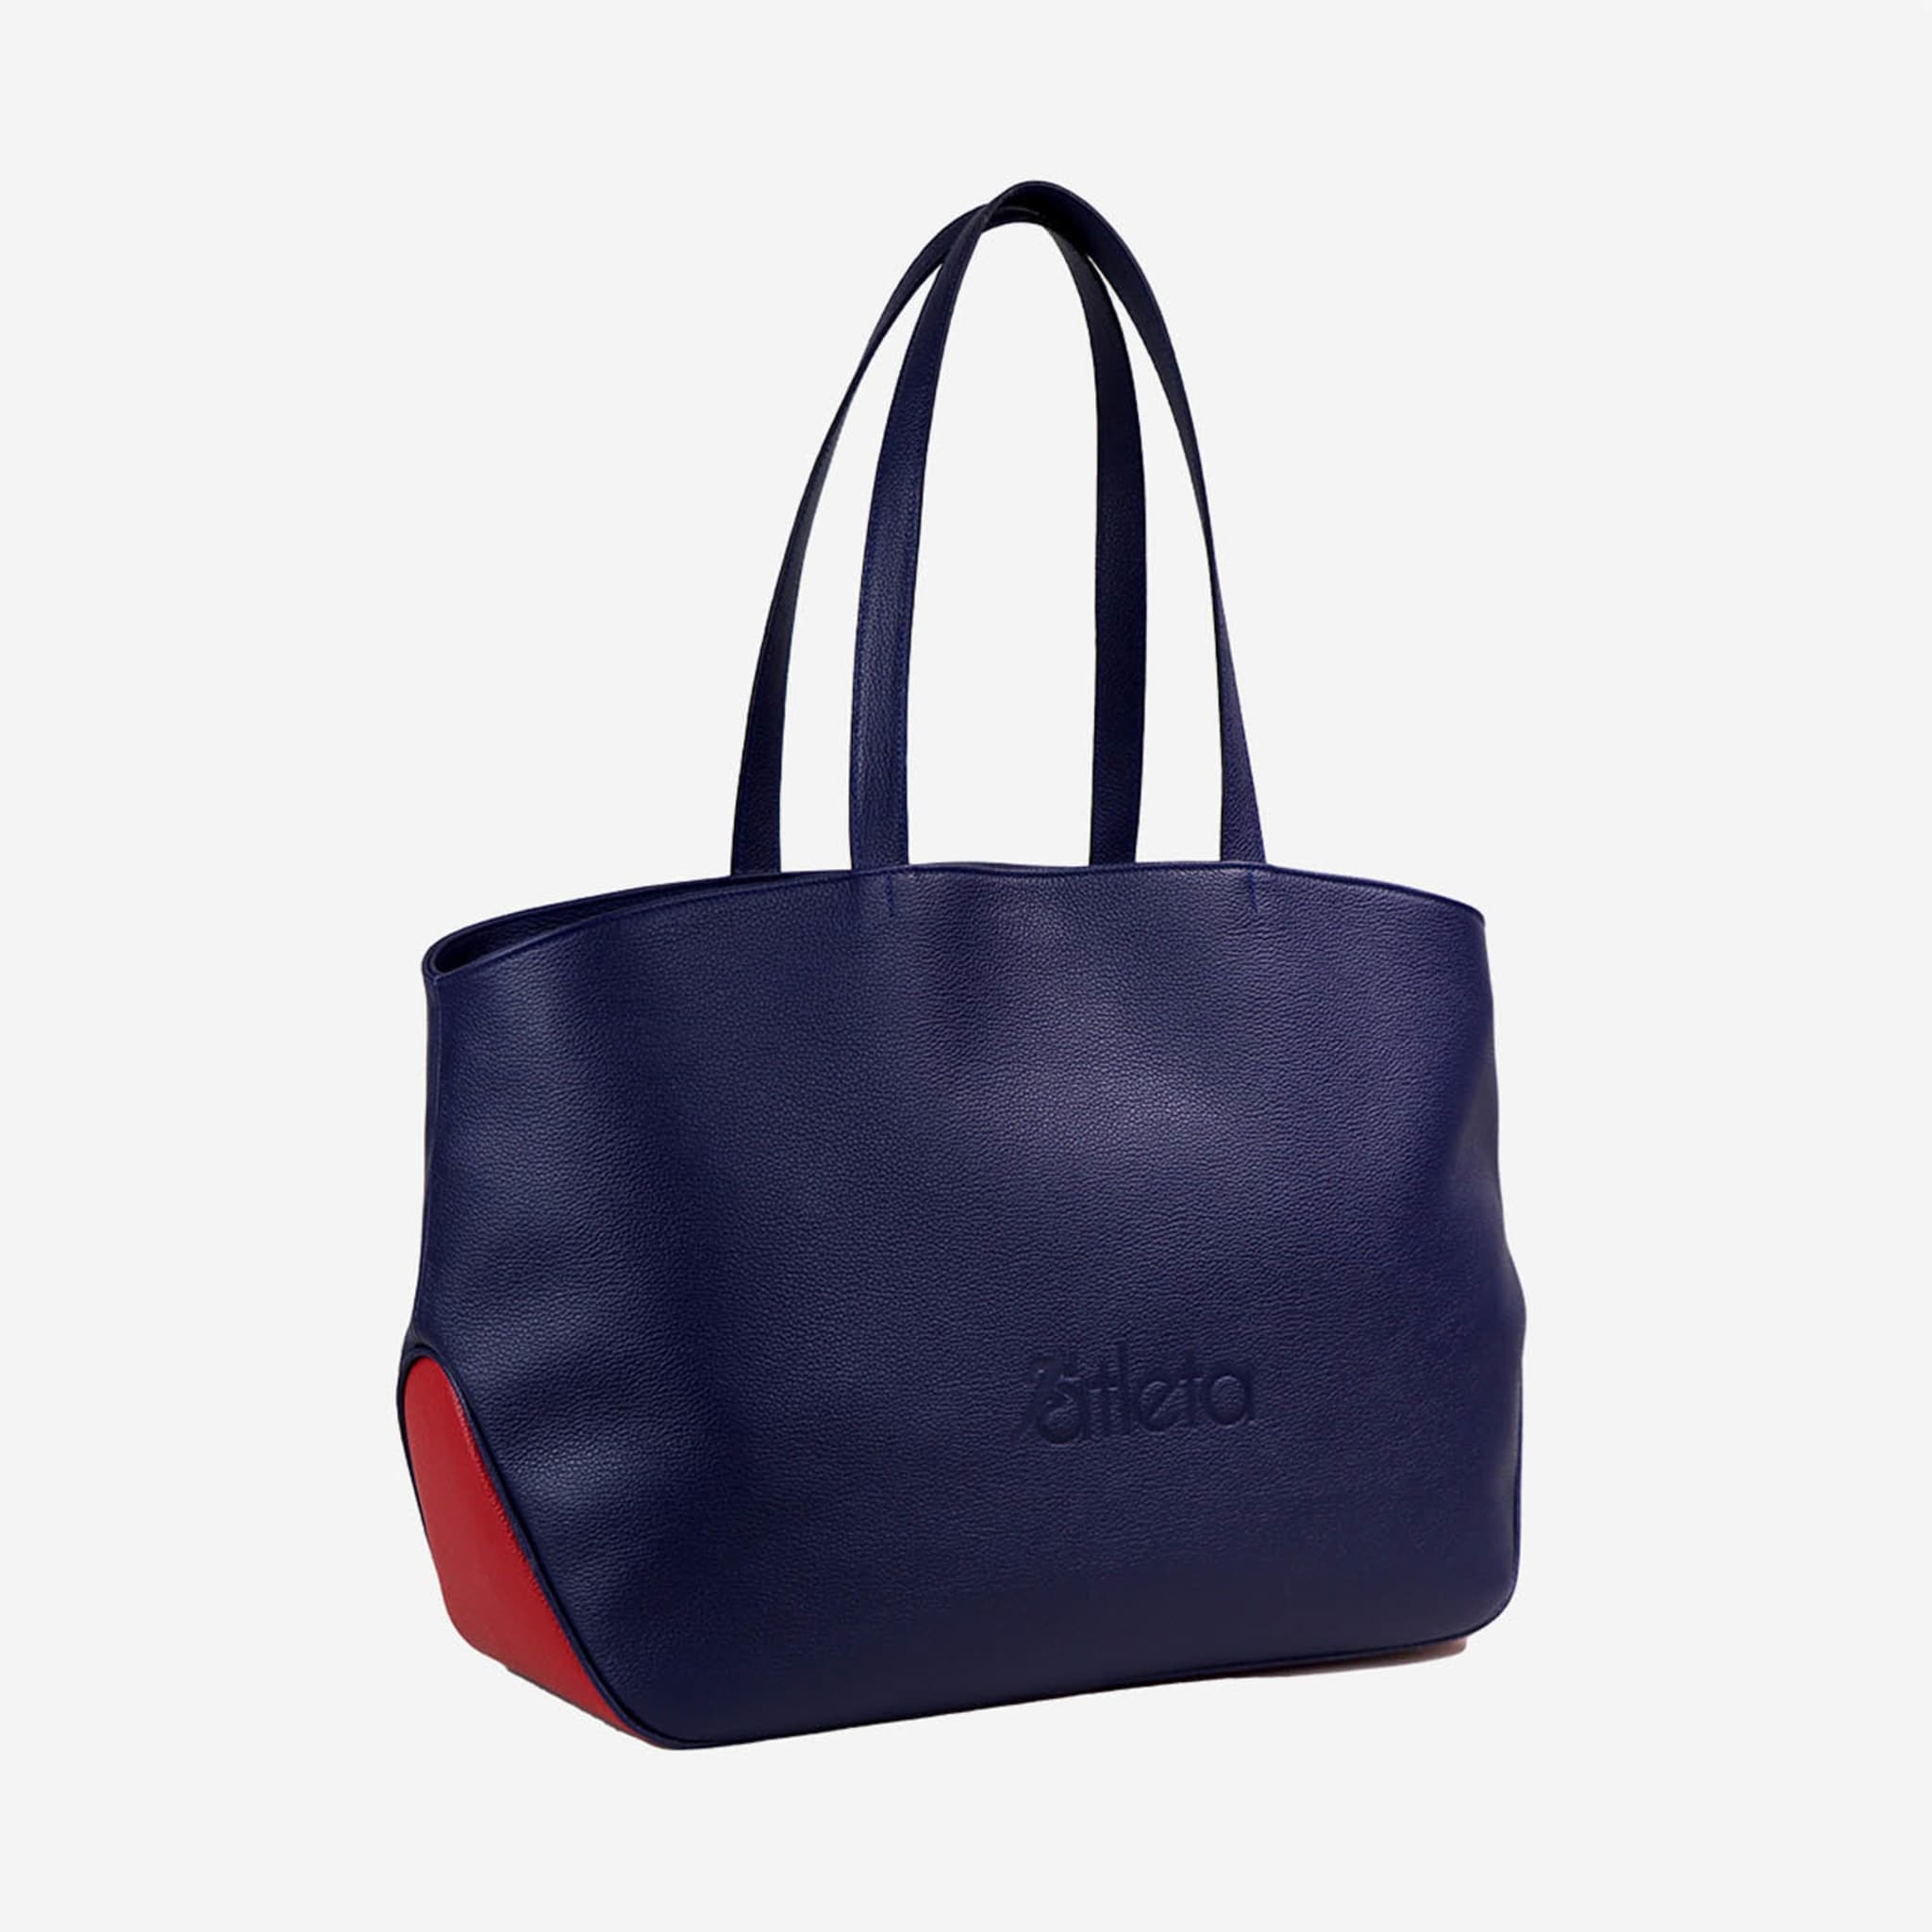 Sport Blue & Red Bag with Tennis-Racket-Shaped Pocket - Alternative view 2